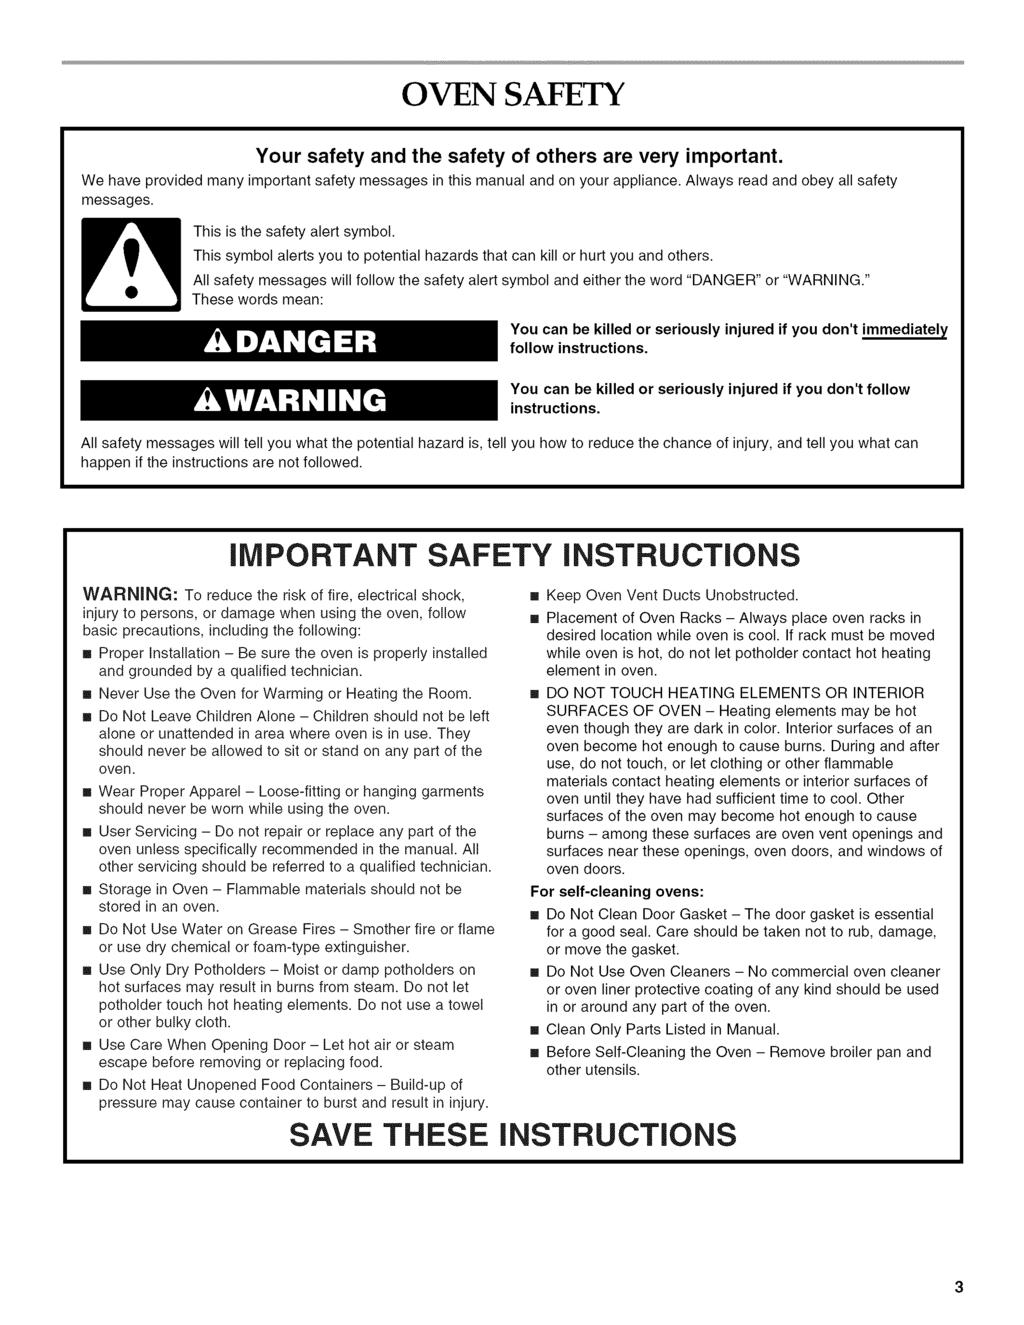 OVEN SAFETY Your safety and the safety of others are very important. We have provided many important safety messages in this manual and on your appliance. Always read and obey all safety messages.